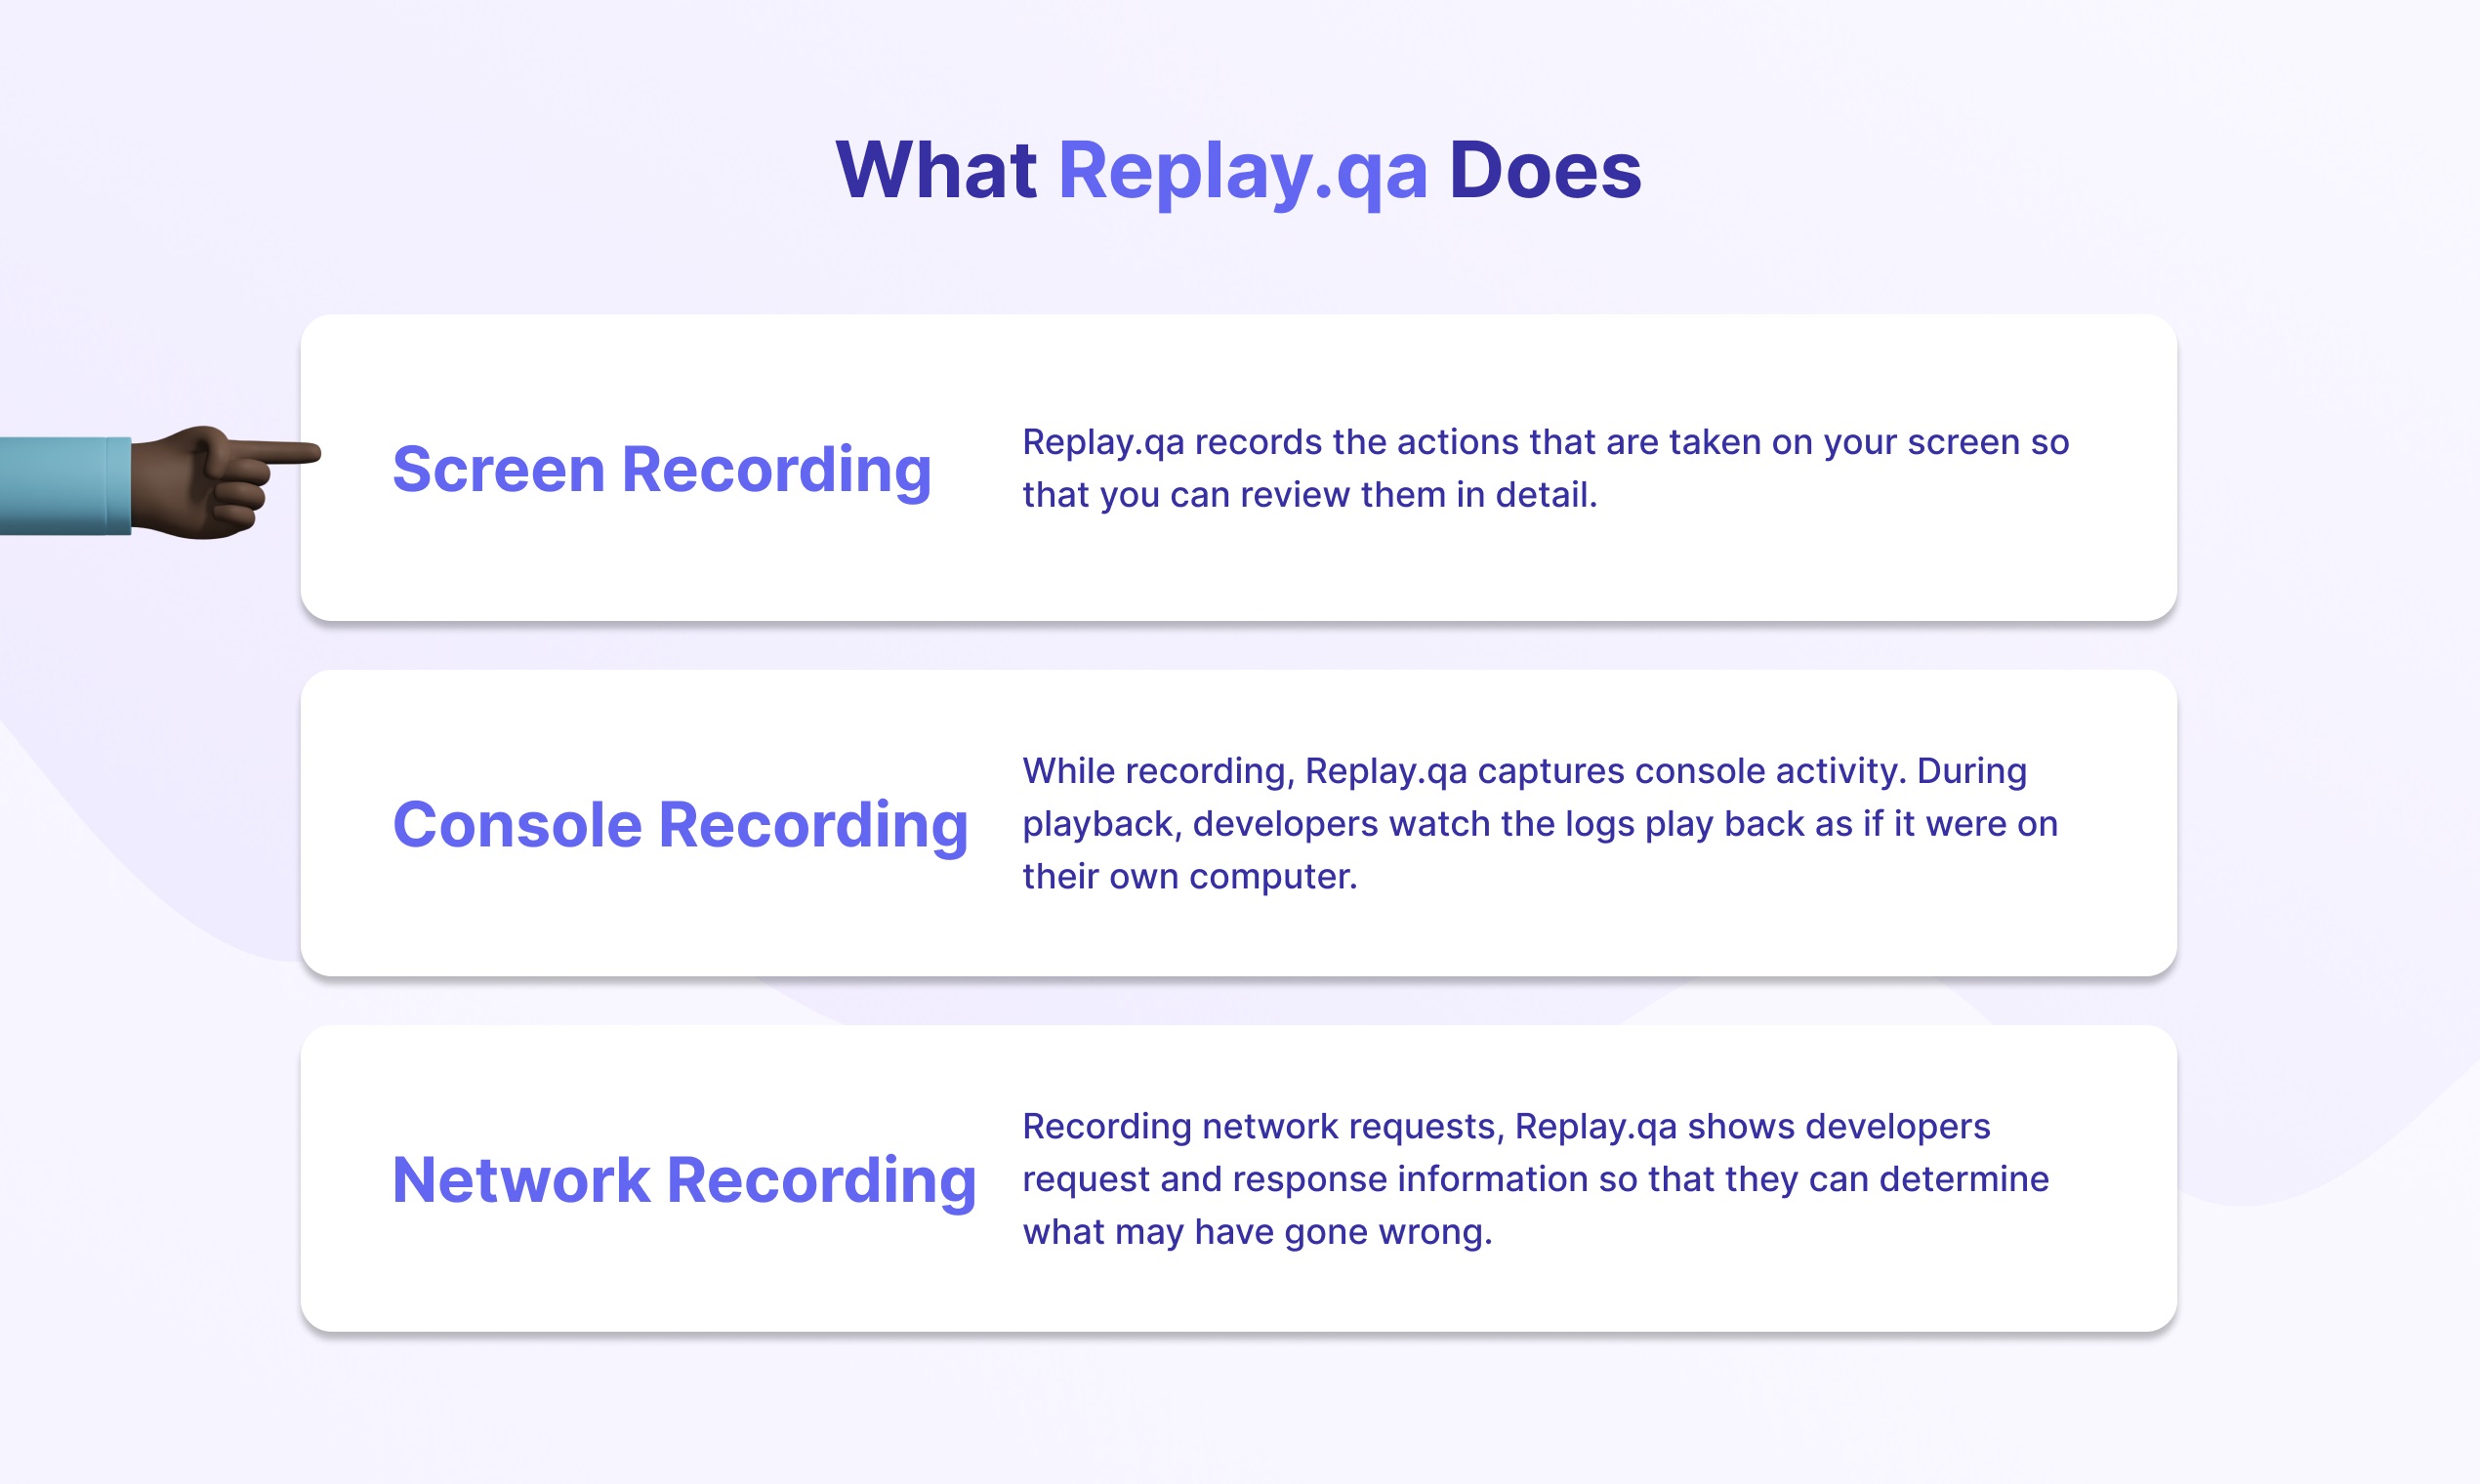 Get feedback from a vast remote working audience about Replay.qa